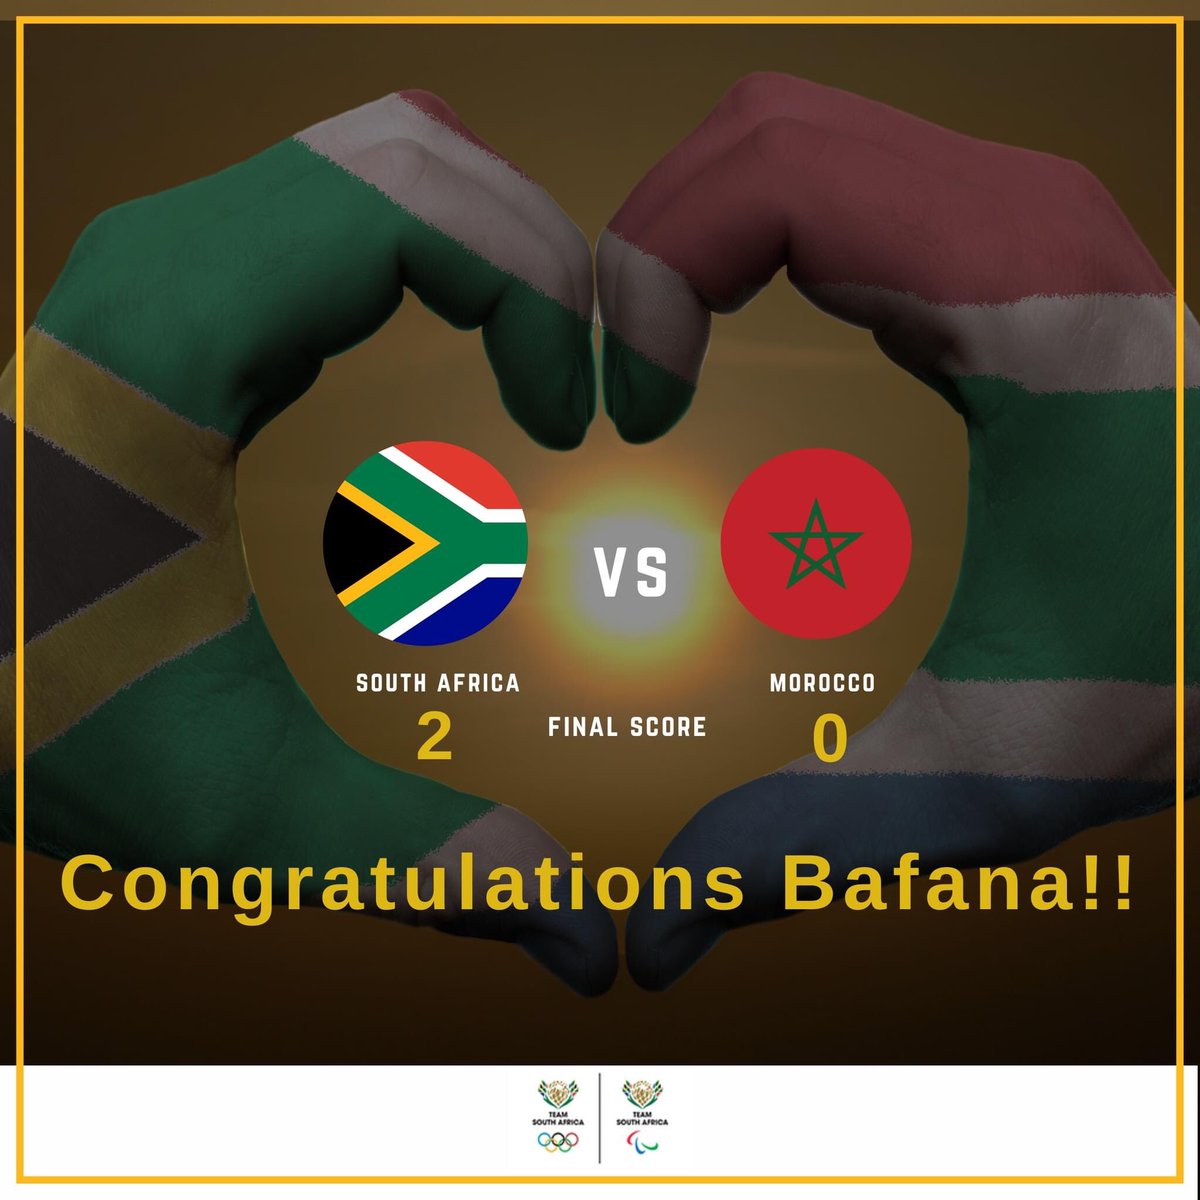 A huge congratulations to our national team @BafanaBafana on their recent win at the #AFCON putting them through to the quarterfinals! We are so proud!!! Wololo🥳